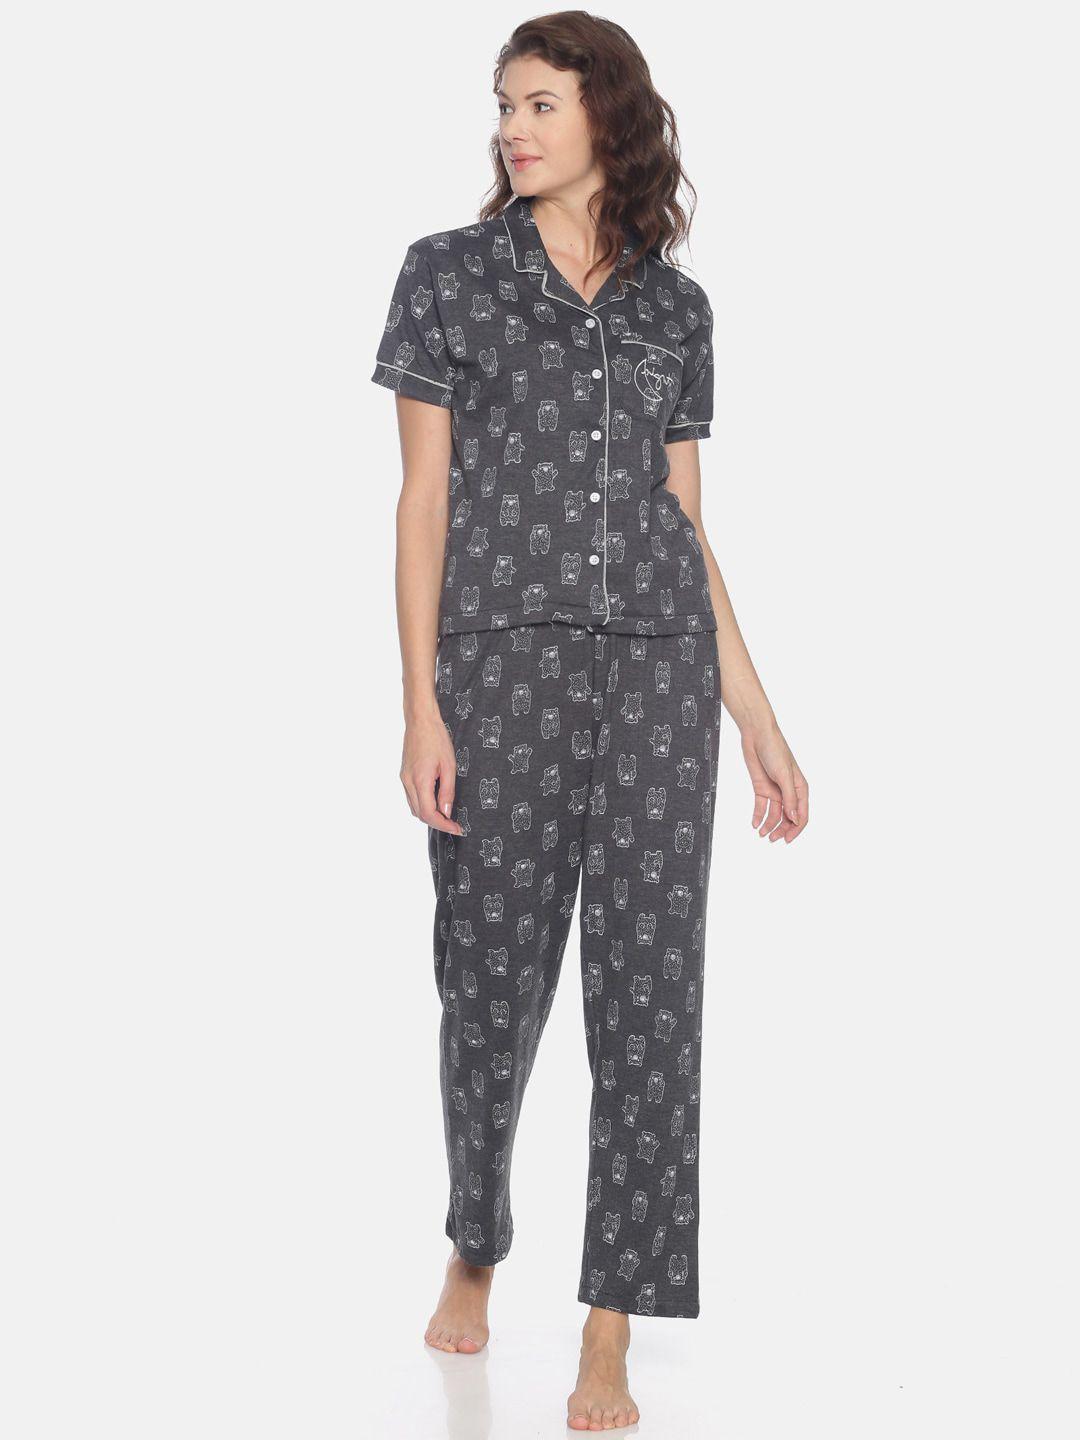 campus sutra women charcoal grey printed night suit